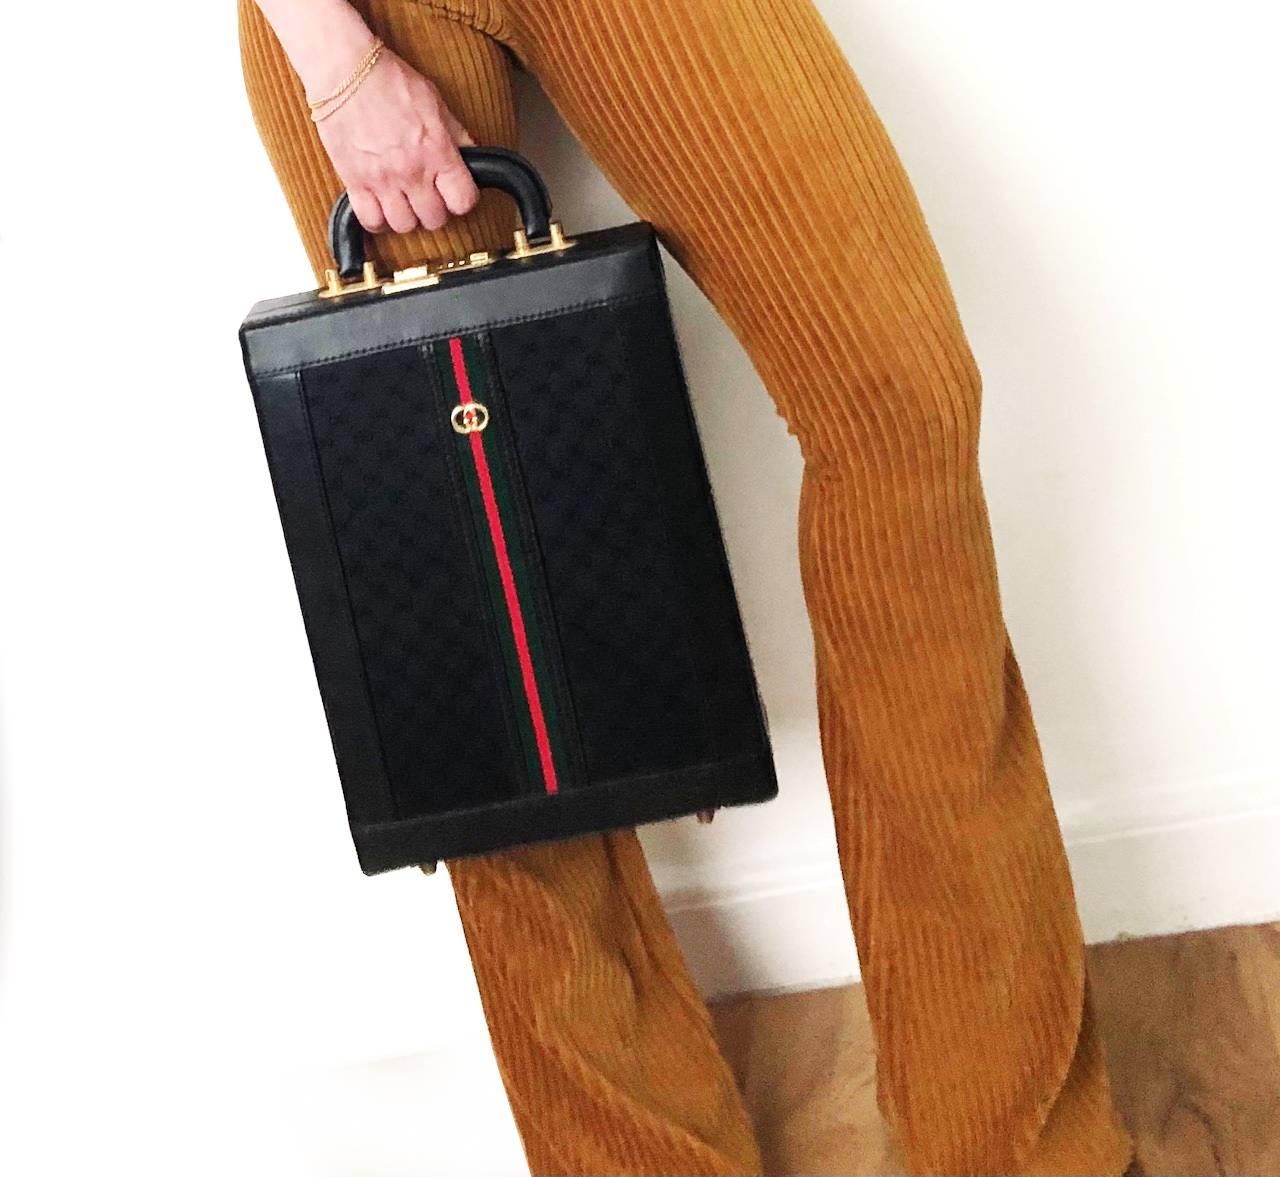 This is the most incredible GUCCI piece! Its a black leather portrait briefcase from the 1980’s collection. With leather trim, suede insert and monogram outside with red and green embellishments and gold logo. An amazing accessory for a meeting and